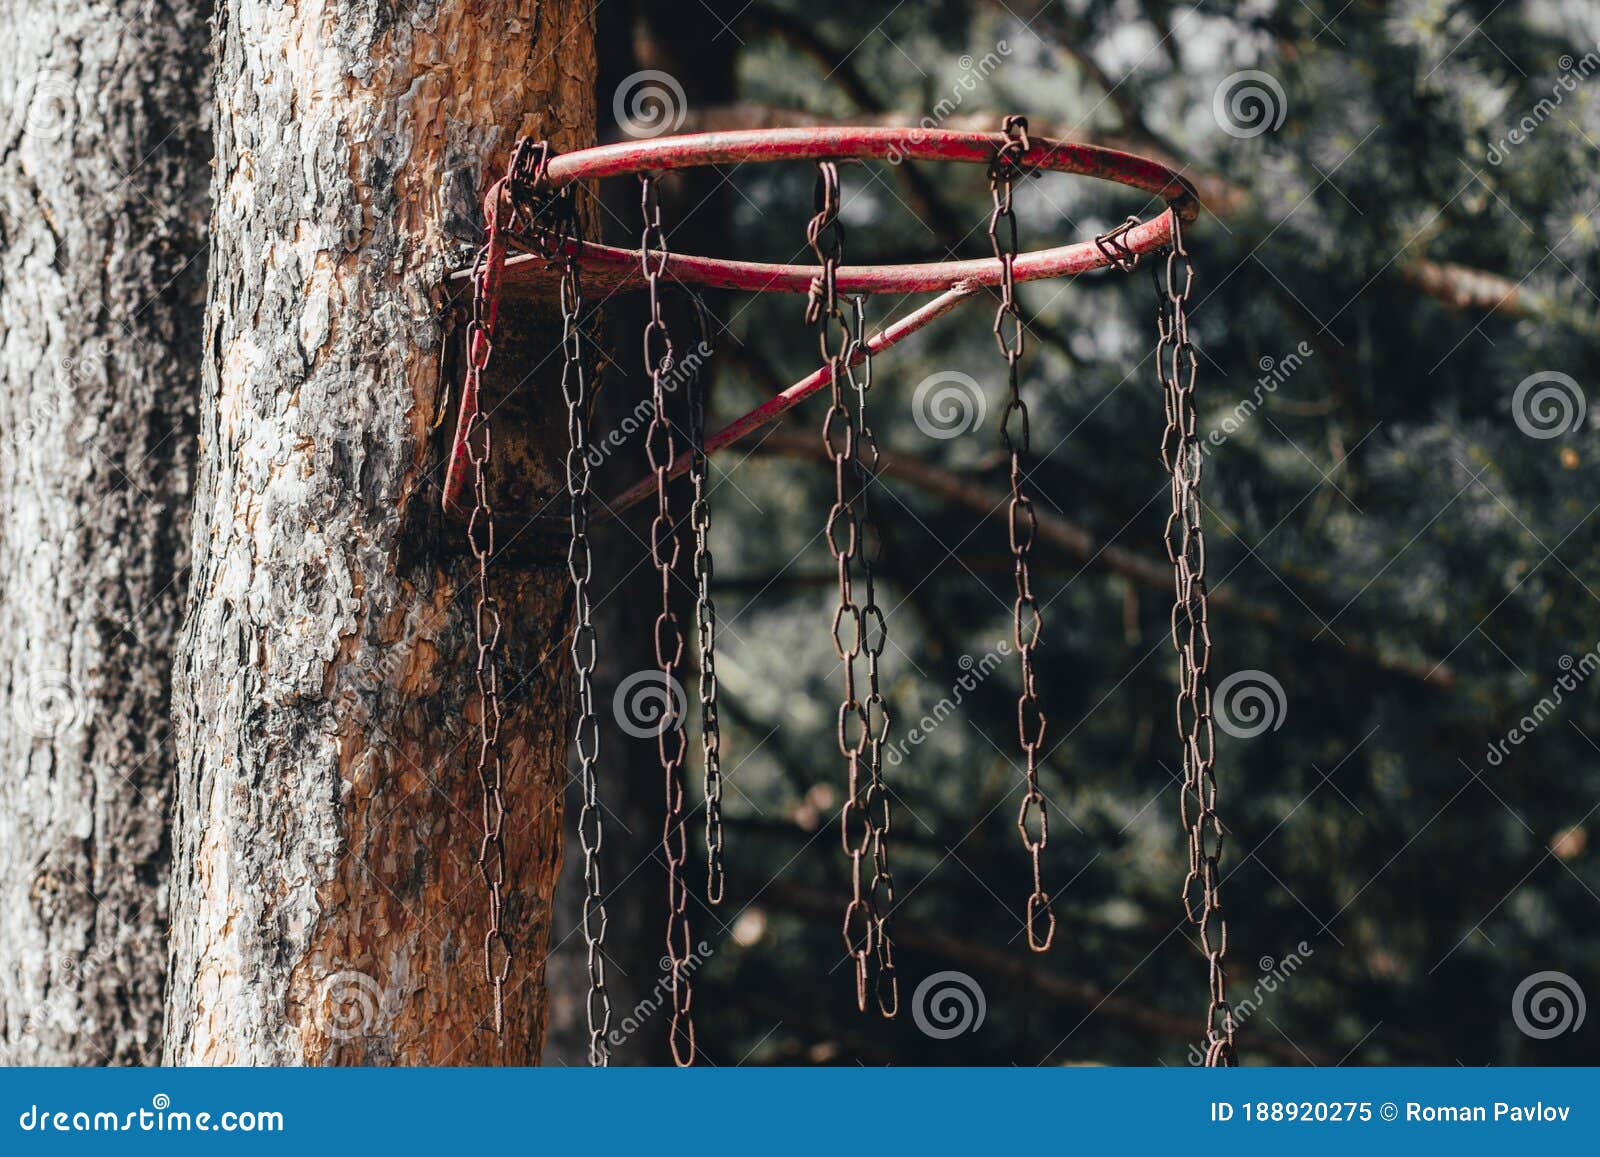 A Basketball Hoop with Chains instead of a Net Stock Image - Image of ...